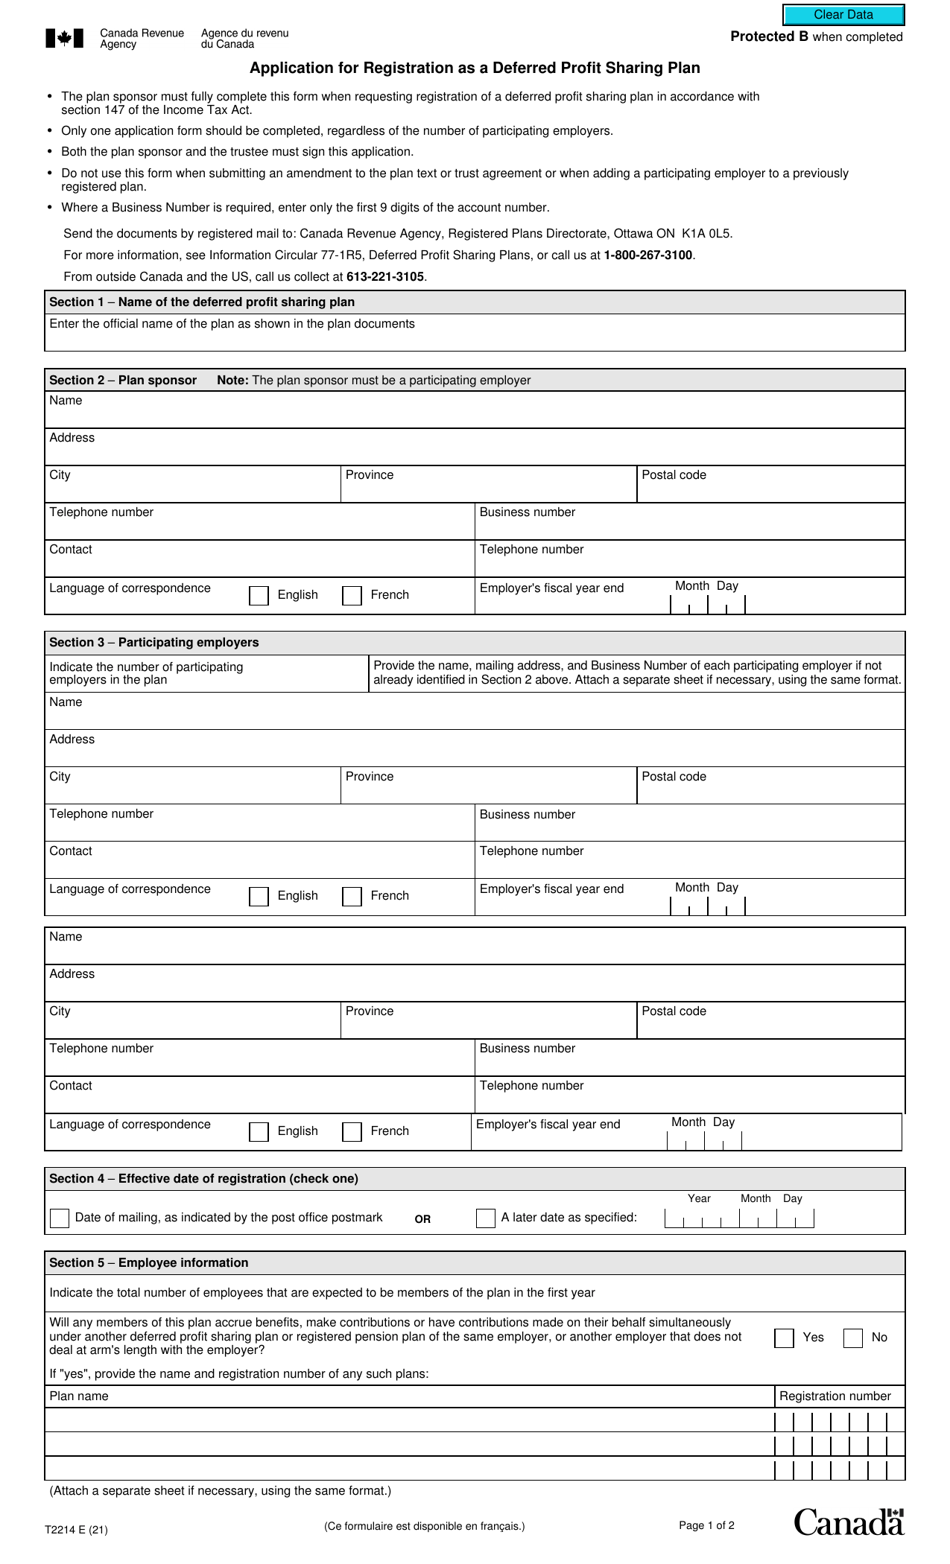 Form T2214 Application for Registration as a Deferred Profit Sharing Plan - Canada, Page 1